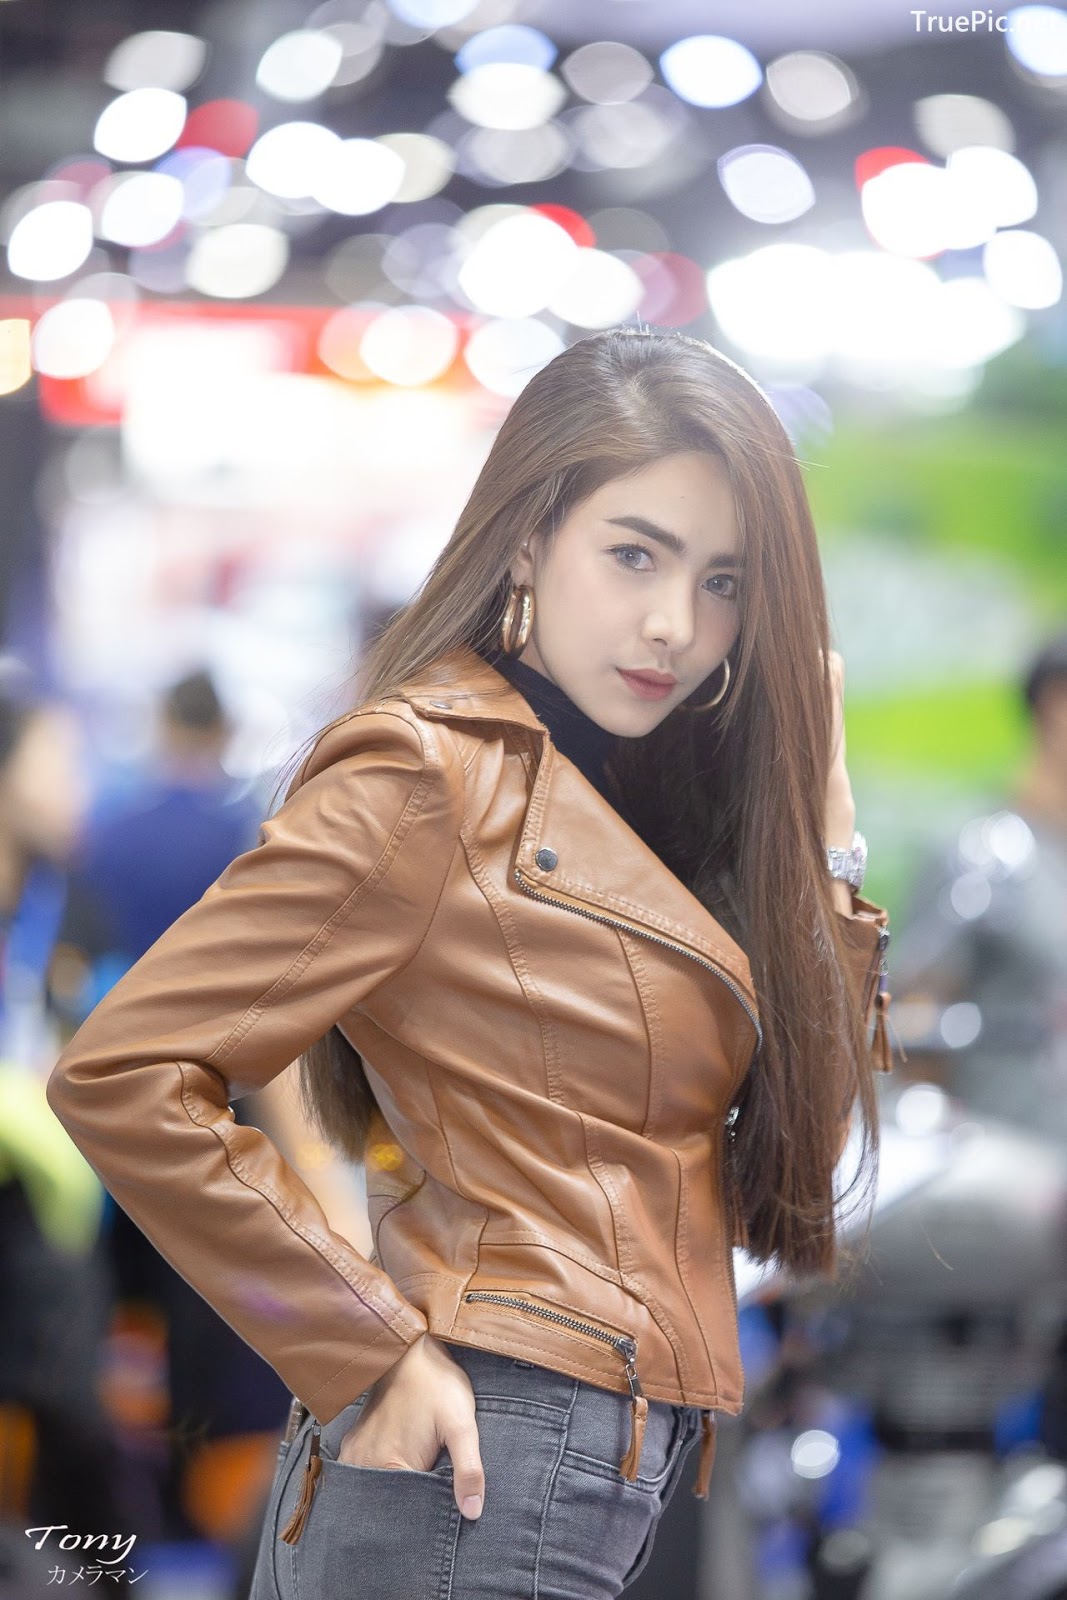 Image-Thailand-Hot-Model-Thai-Racing-Girl-At-Motor-Expo-2019-TruePic.net- Picture-14